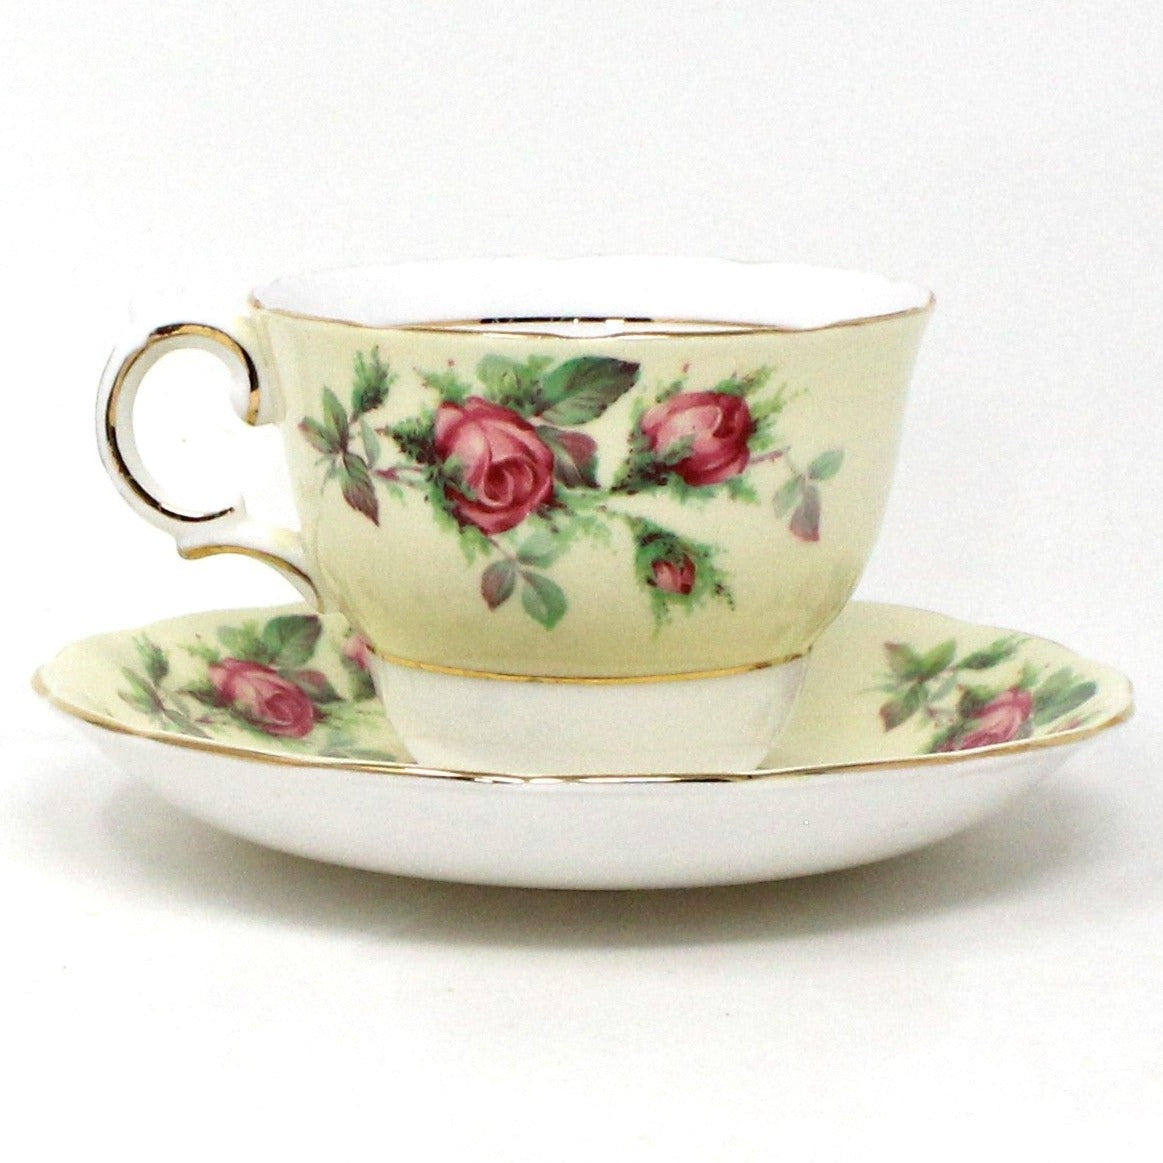 Teacup and Saucer, Crown Essex, 6734 Bone China, Pink Roses on Light Yellow Band, Vintage